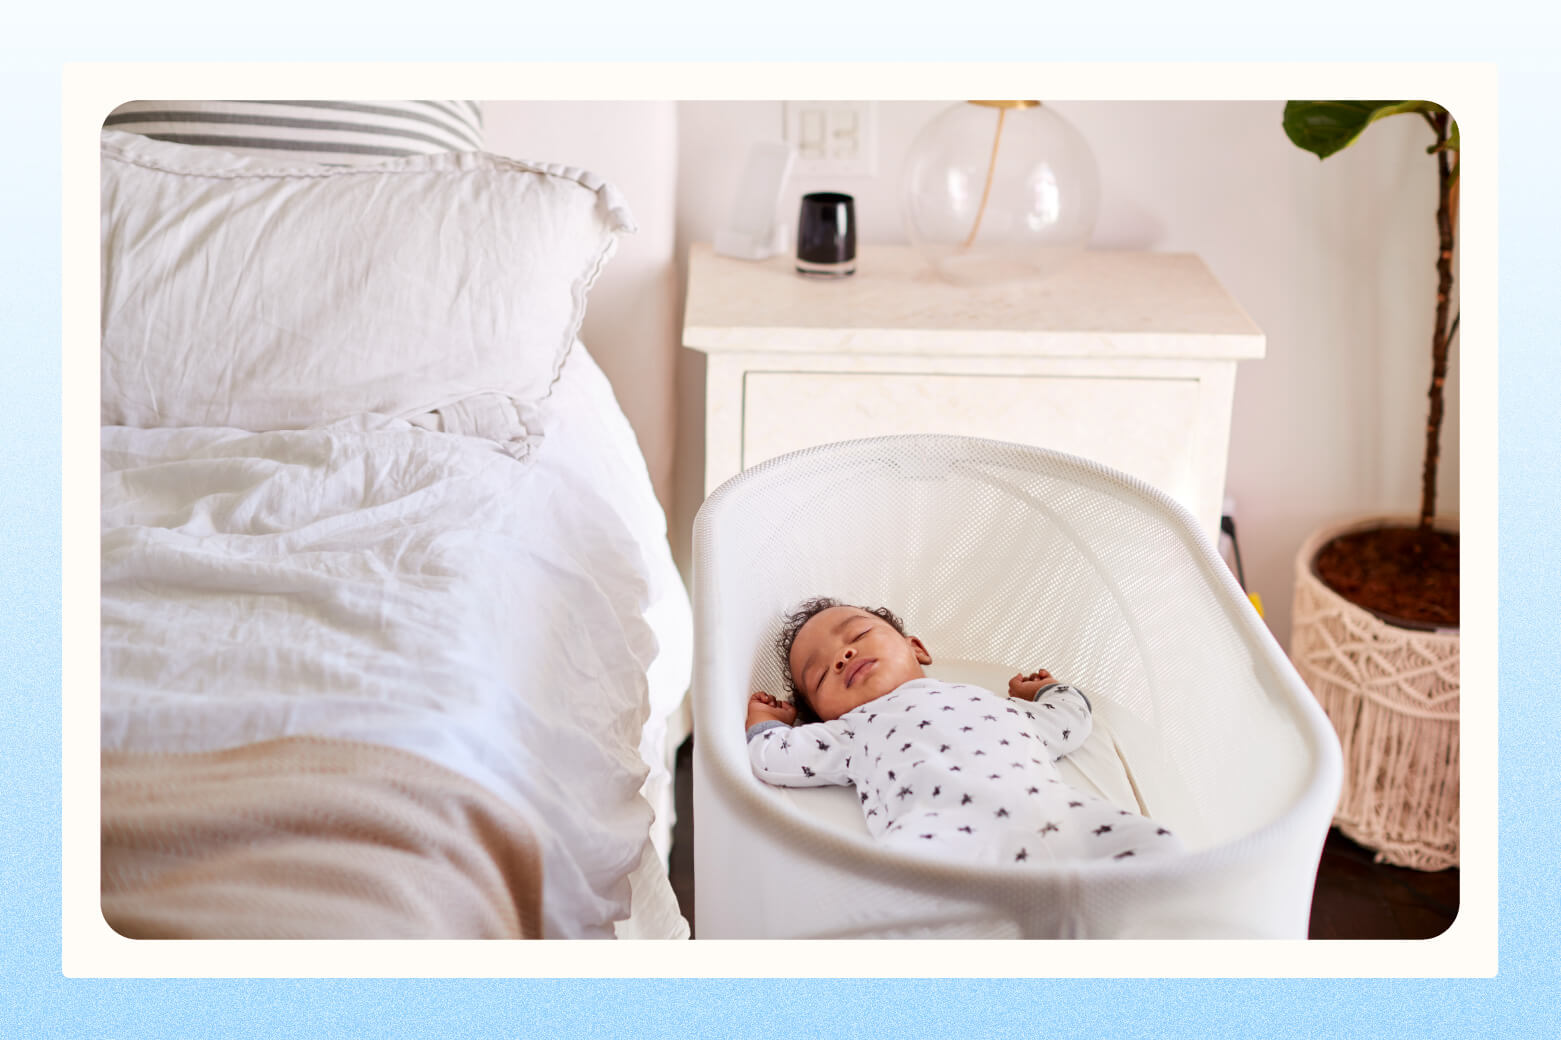 Sleeping baby lays in bassinet positioned next to parents' empty bed